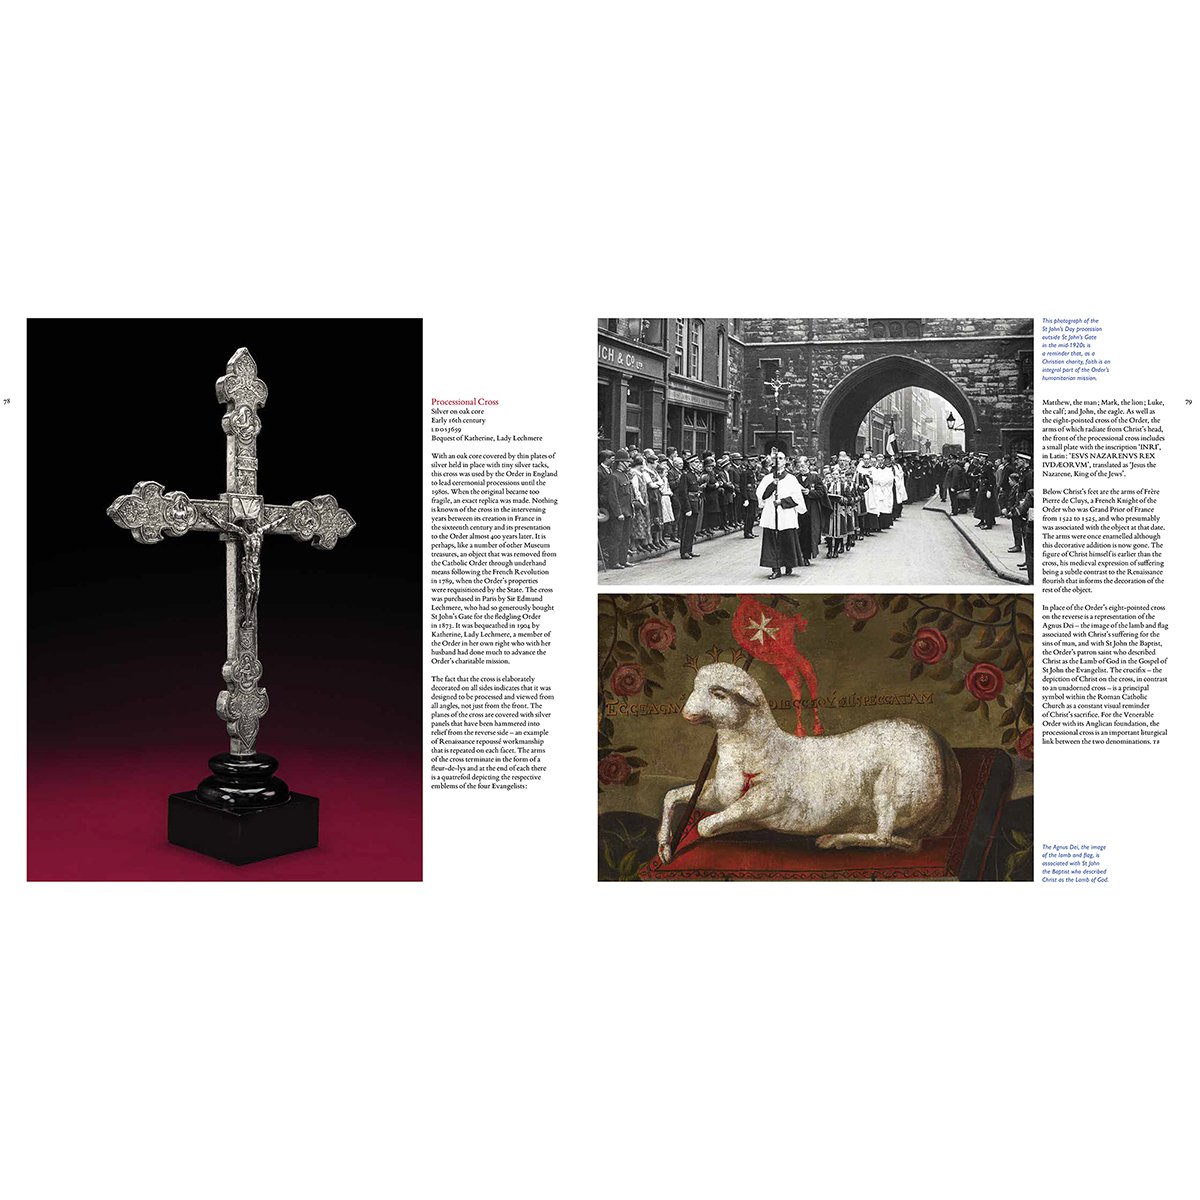 TREASURES DELUXE EDITION â€“ Highlights from the Collection of the Museum of the Order of St John